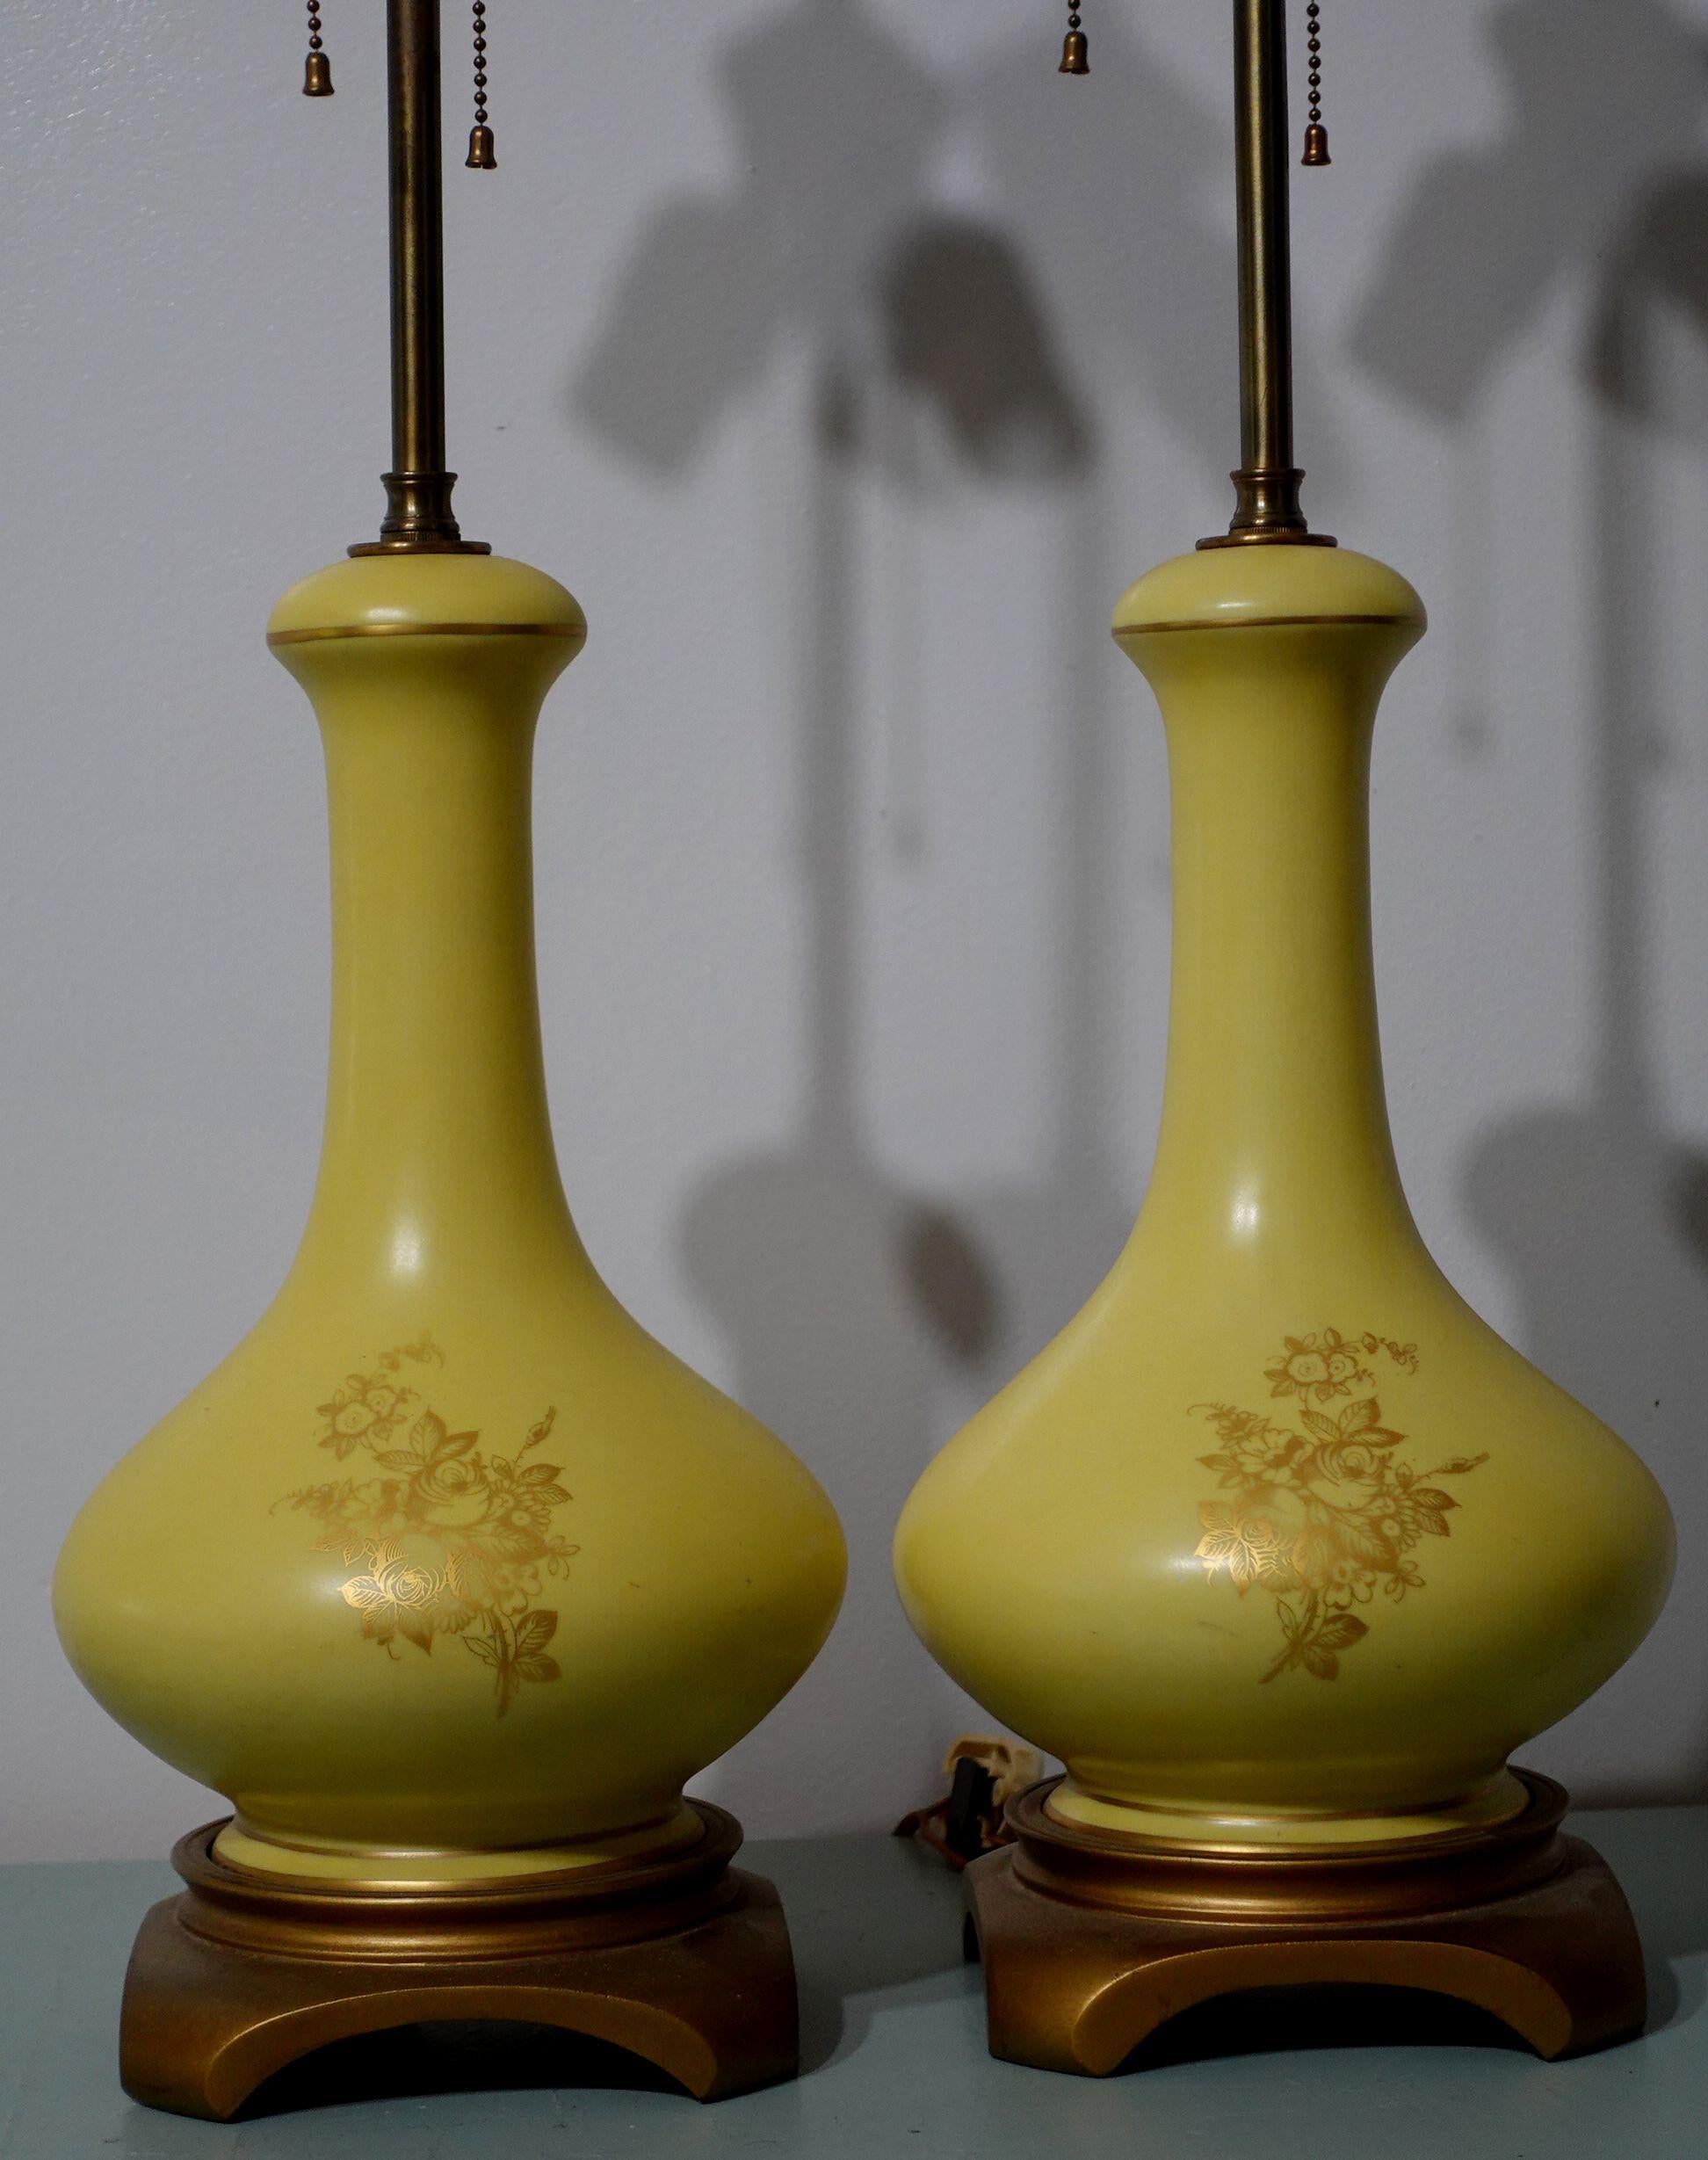 Porcelain Antique Pair of Shaped Hand-Painted Reserved Floral Lamps, 1900s For Sale